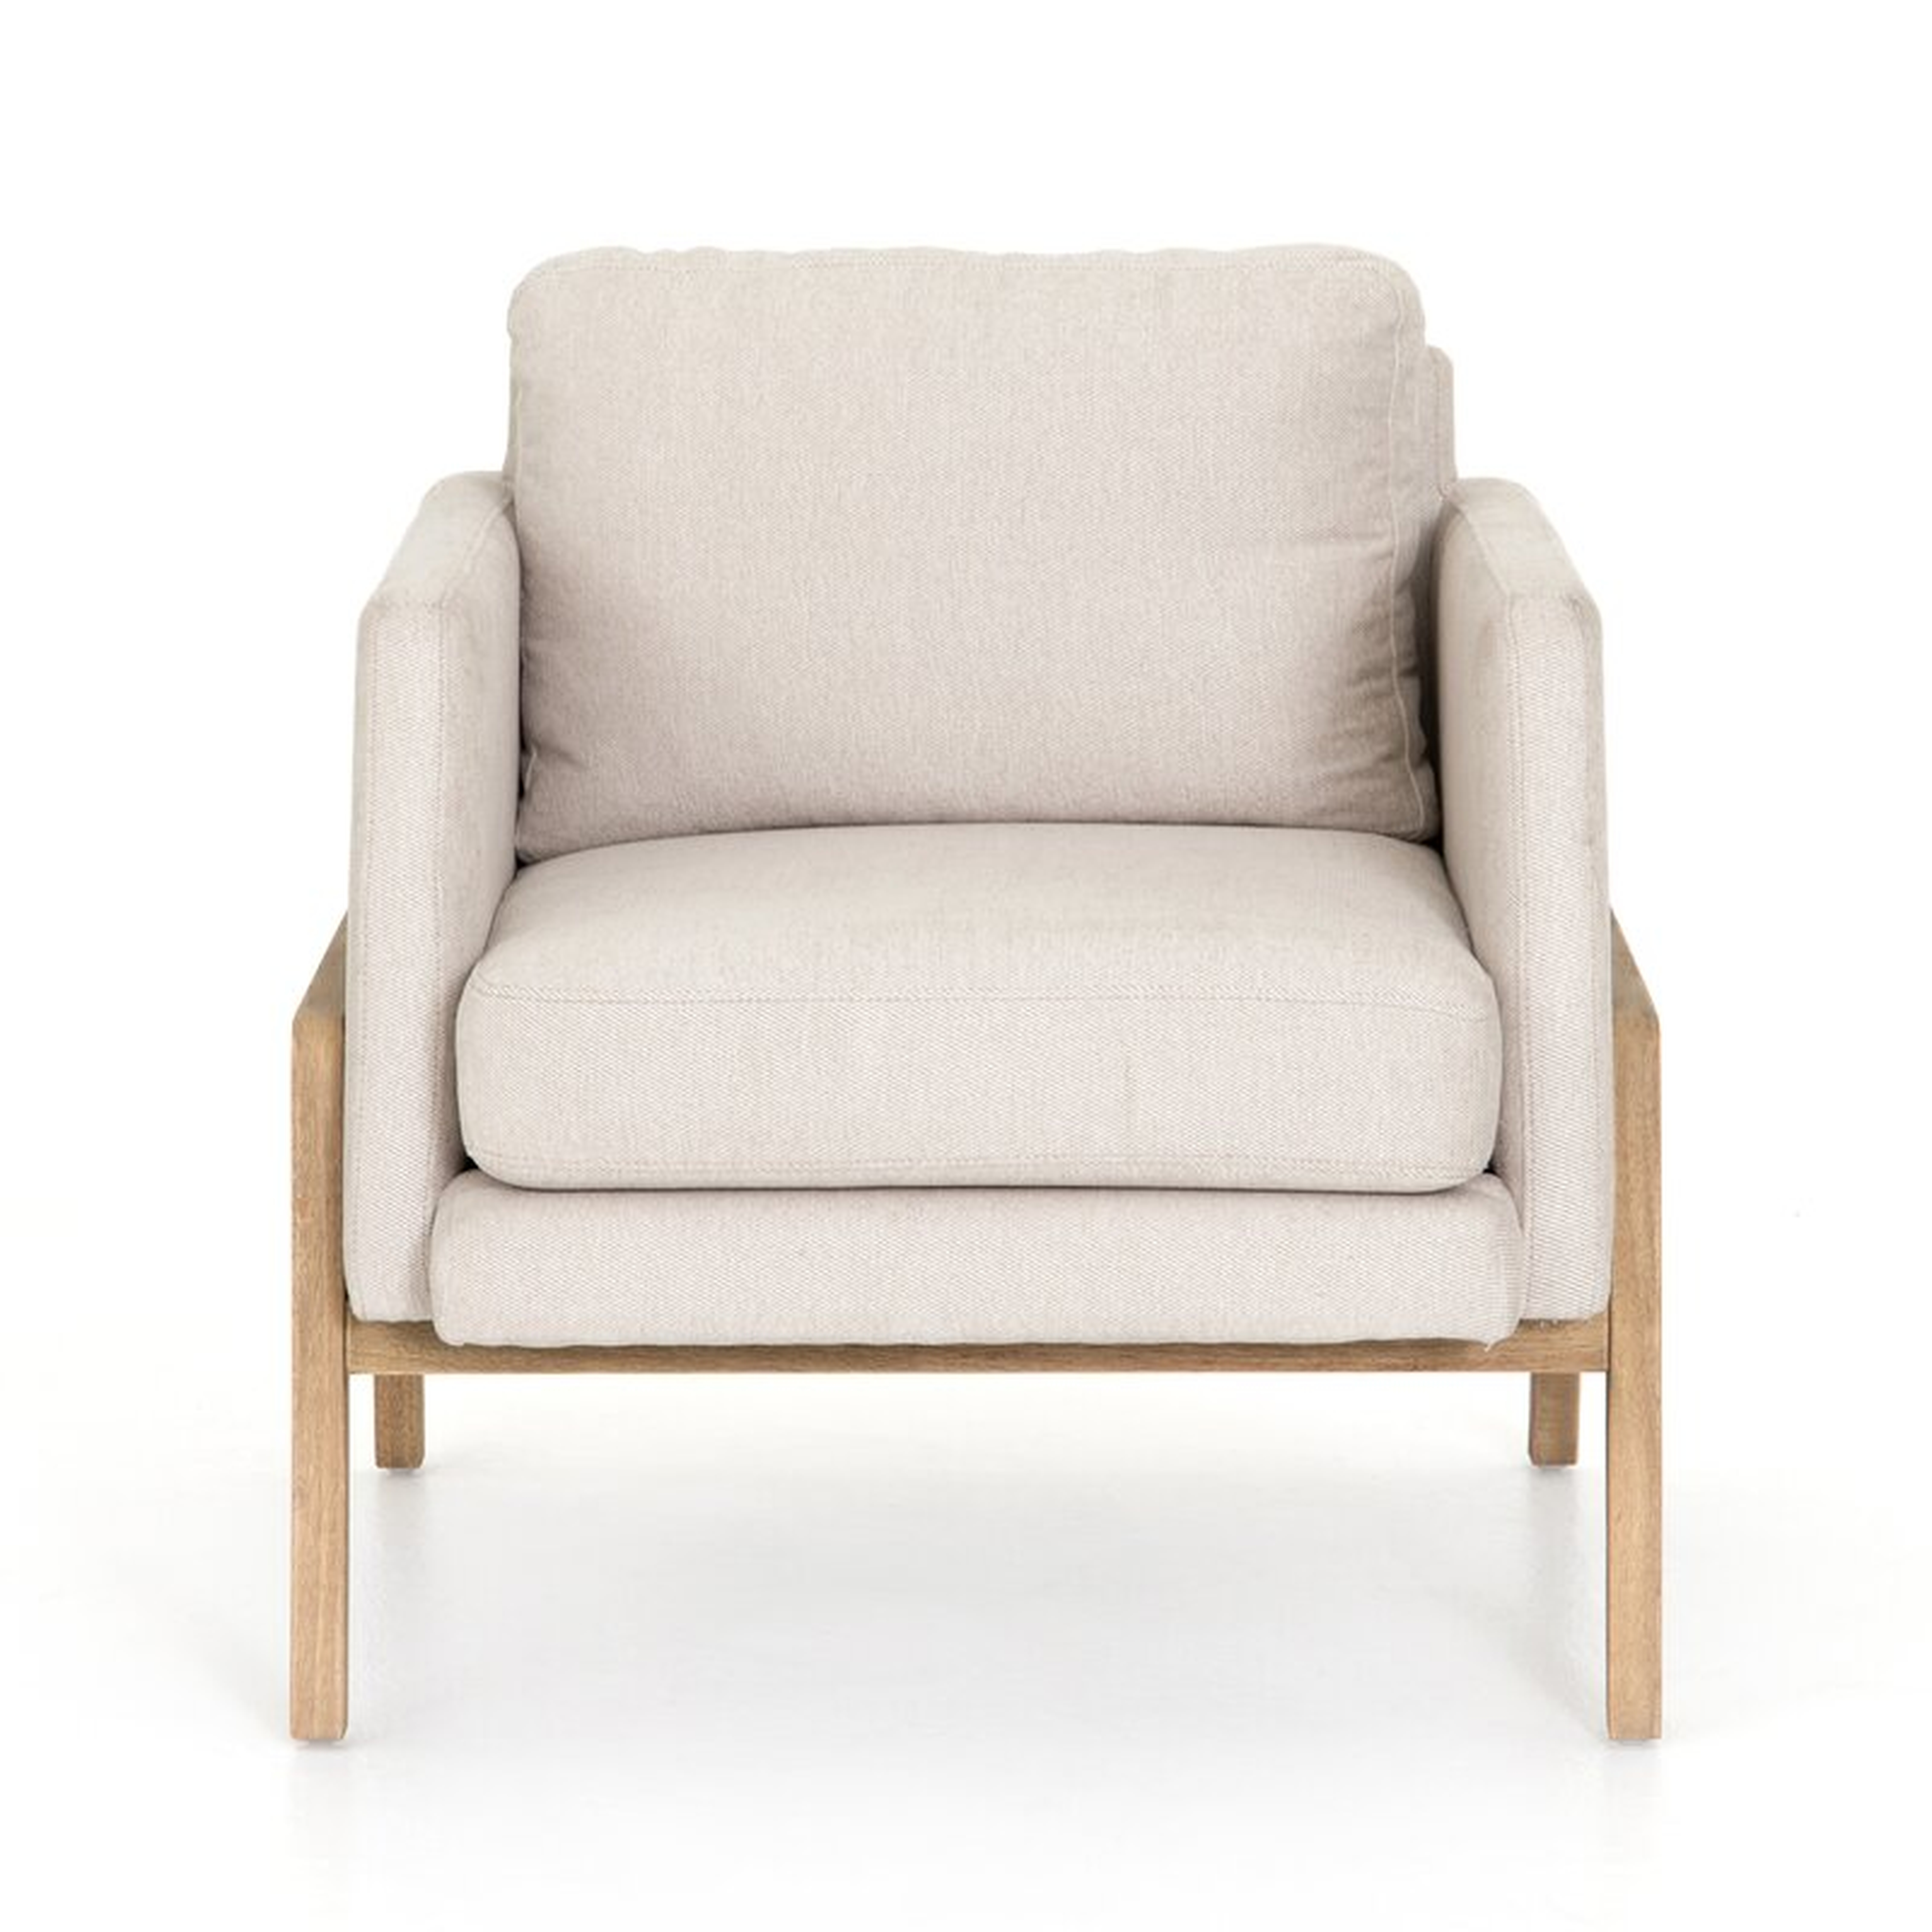 Diana Solid Wood Armchair - Perigold